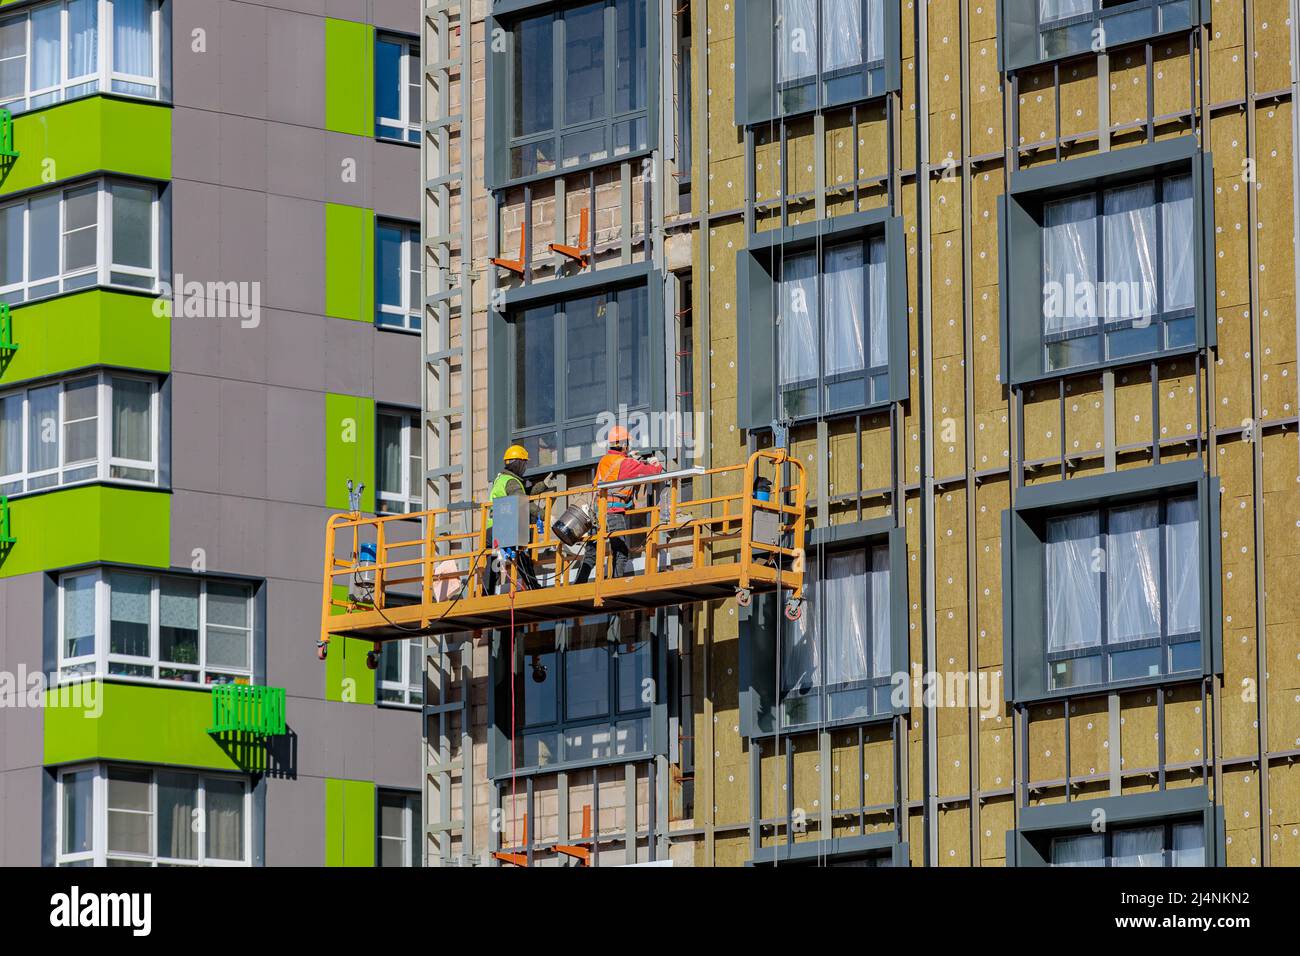 Male builders work on the facade of the building in a suspended cradle. Construction works. Stock Photo